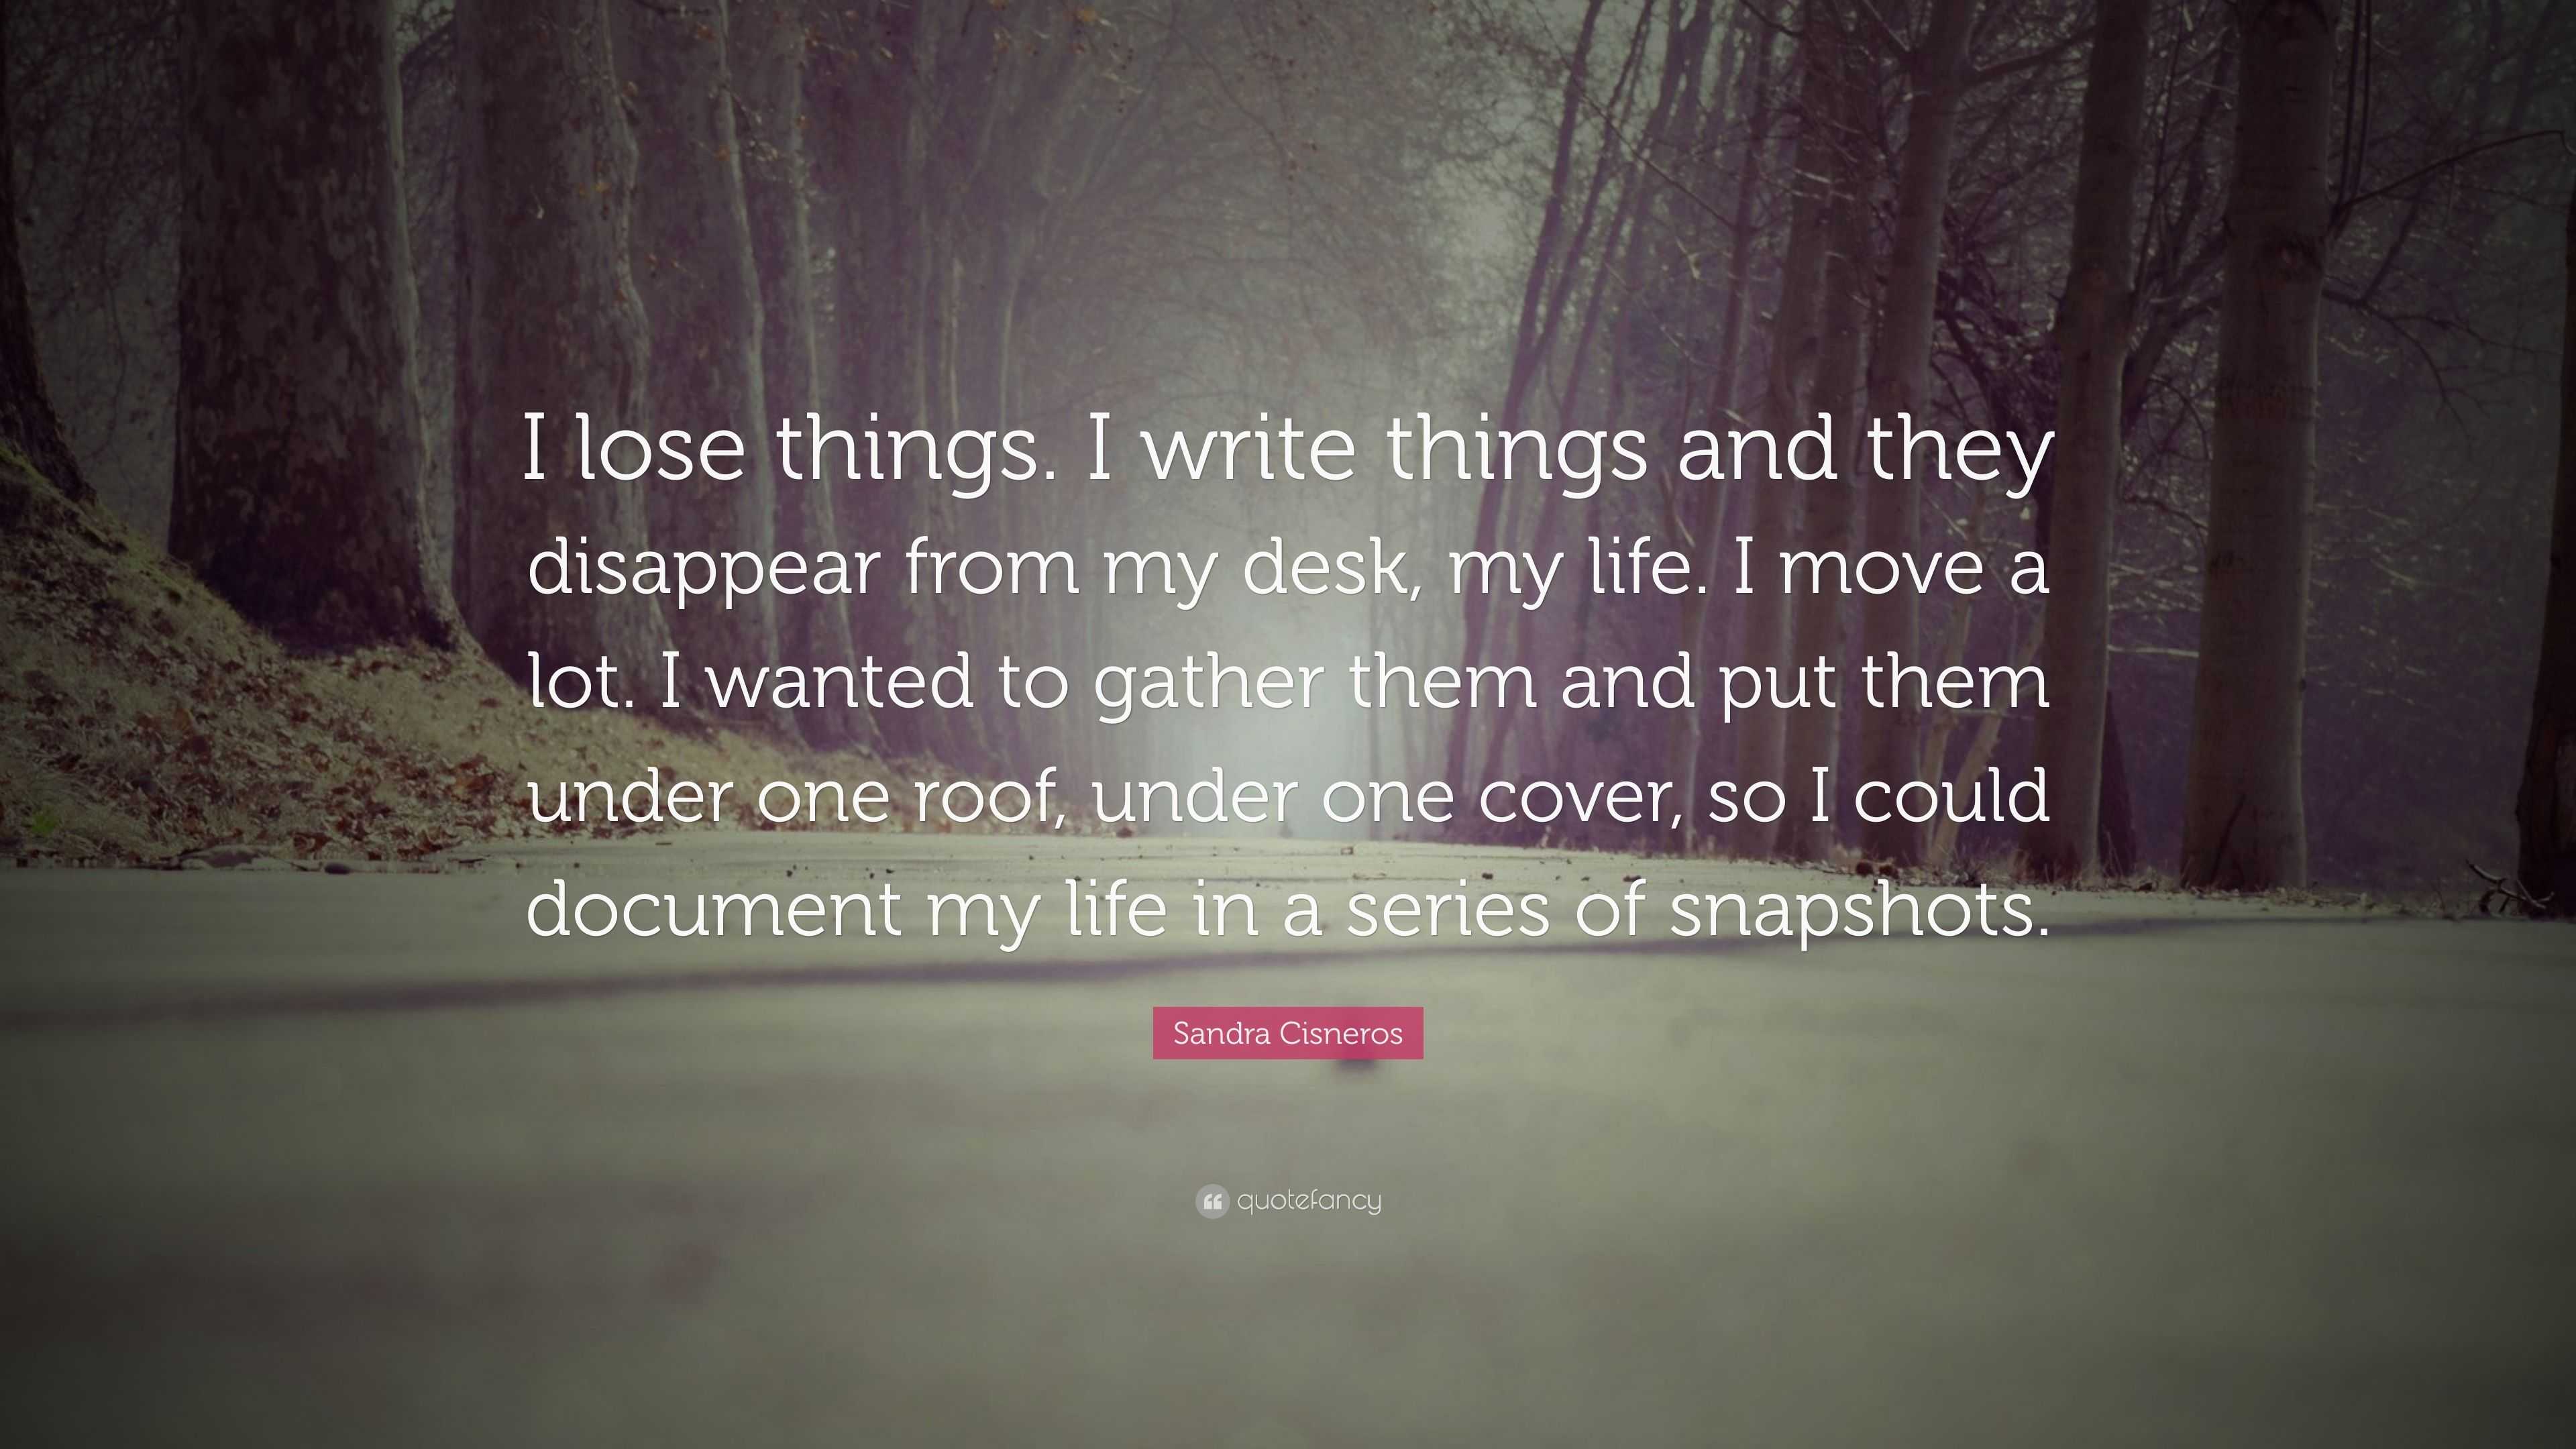 Sandra Cisneros Quote “I lose things I write things and they disappear from